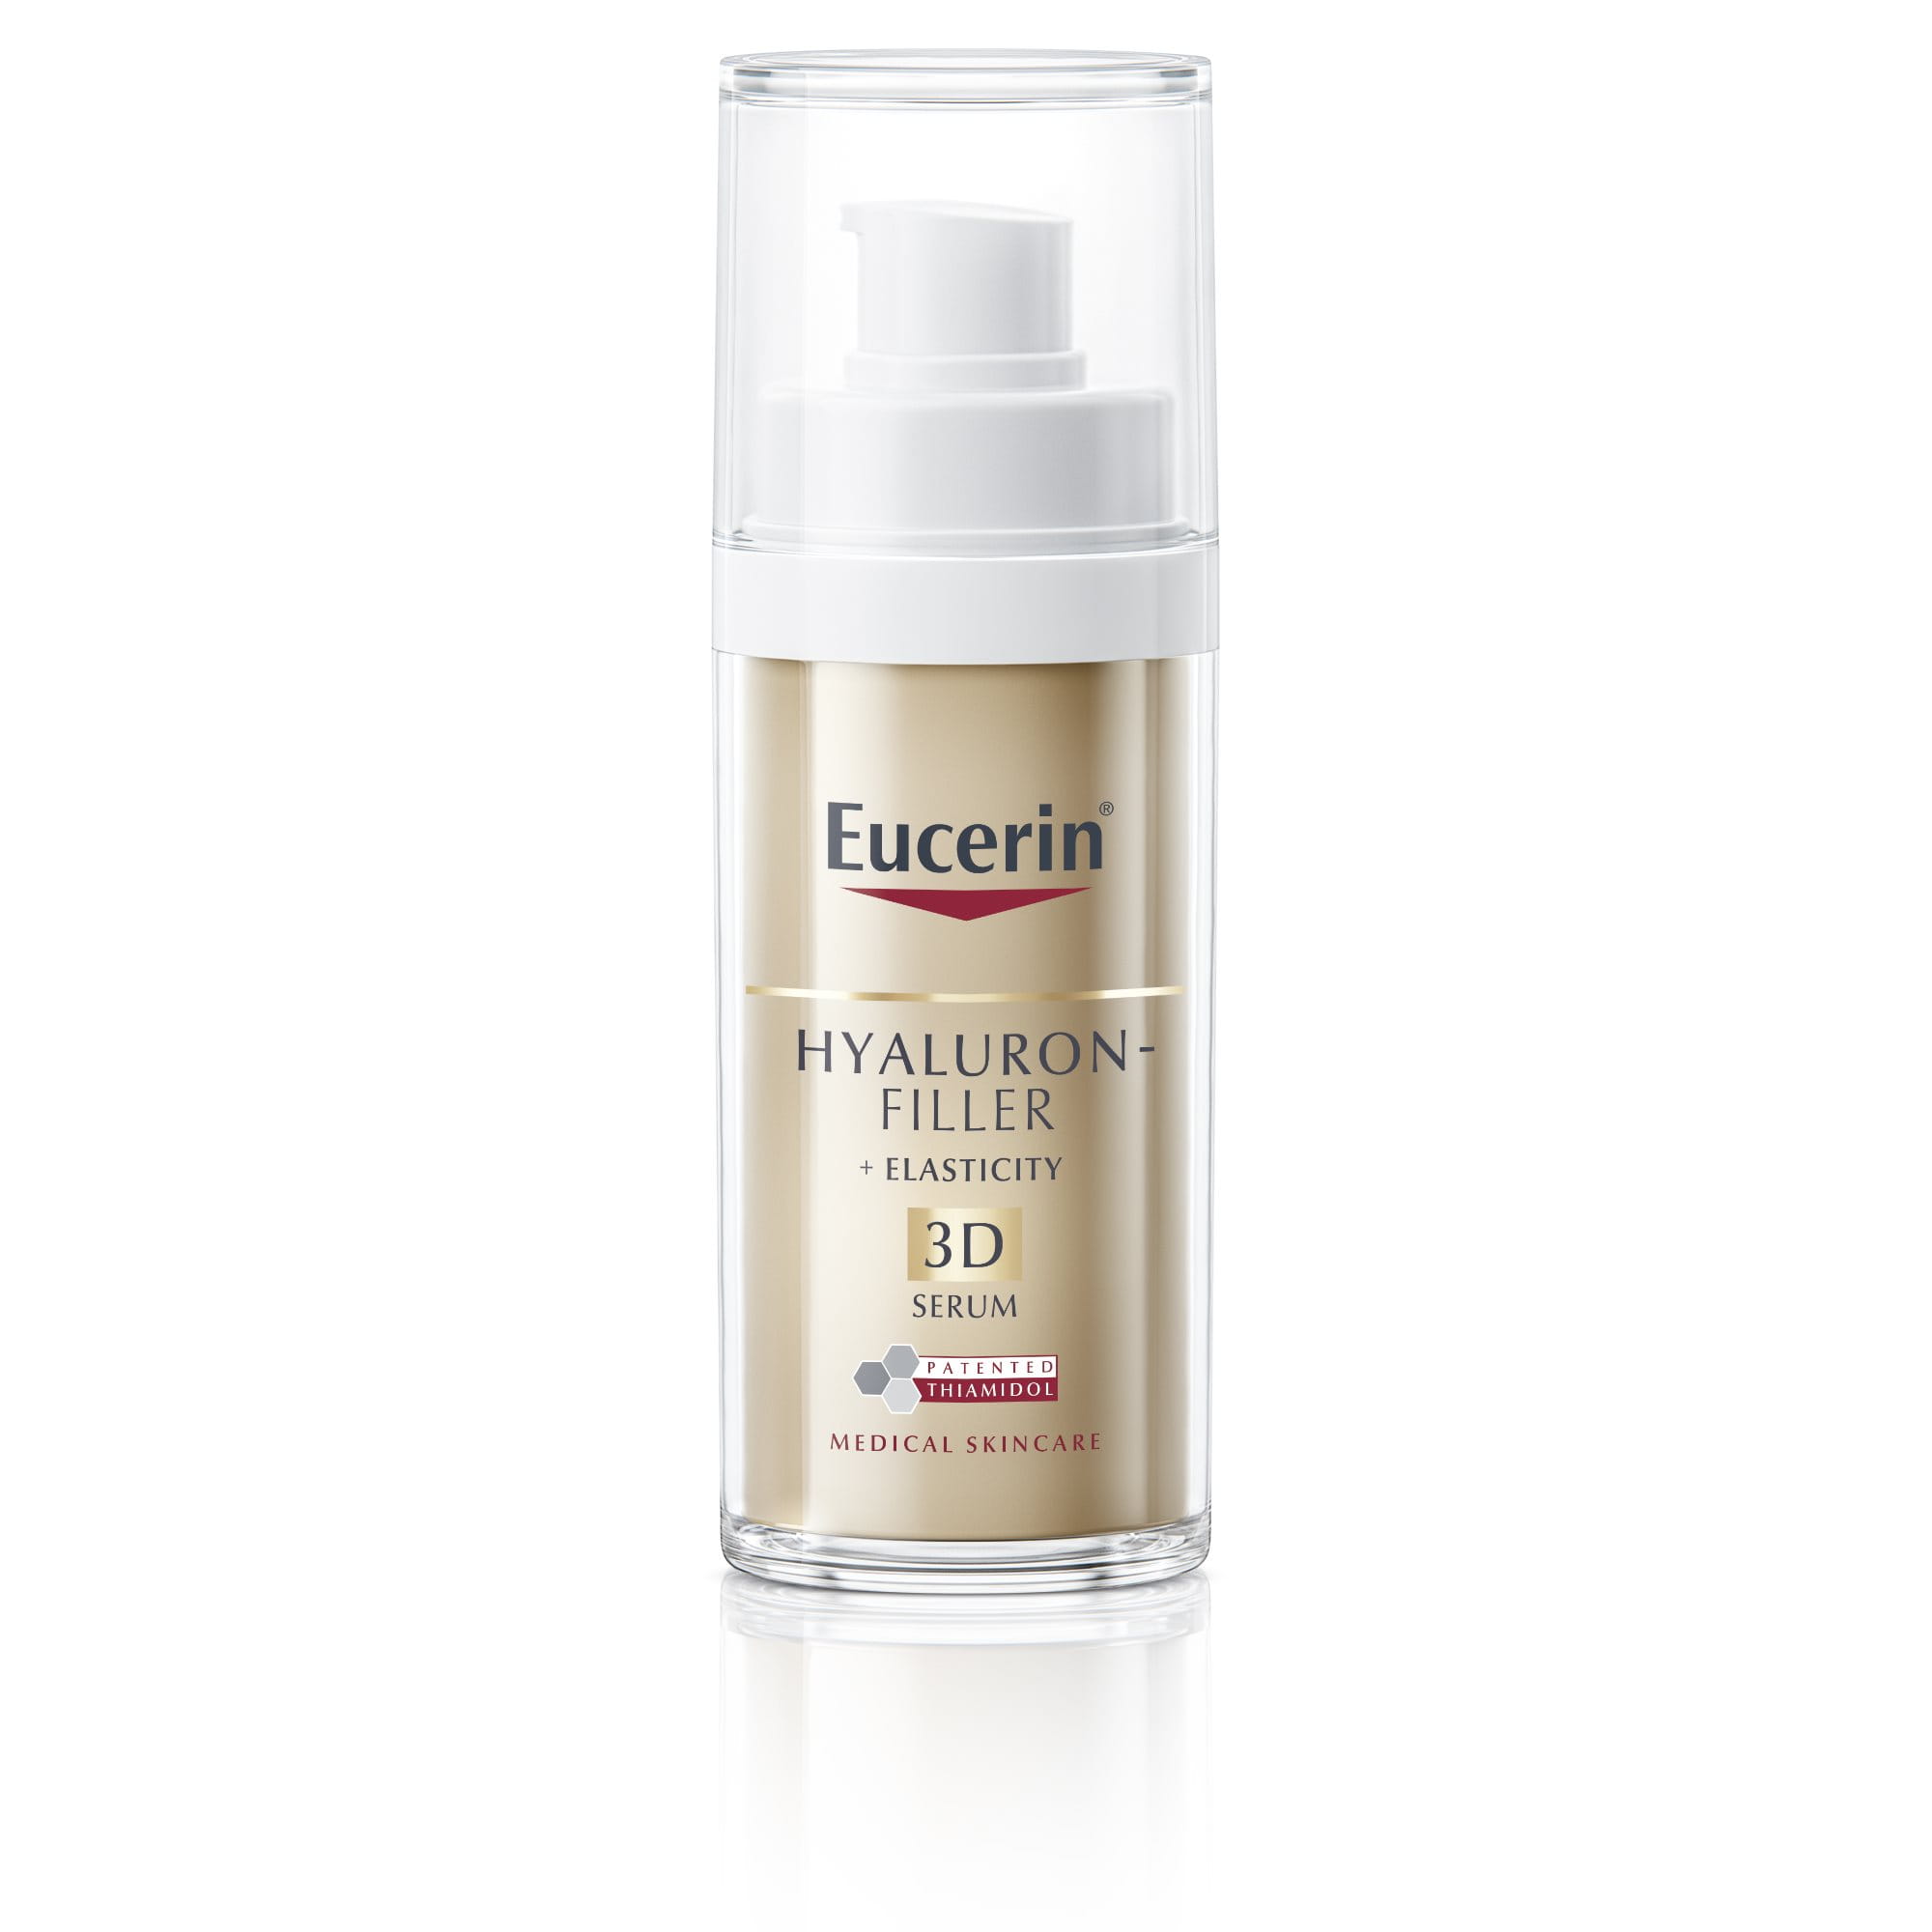 Age spot remover from Eucerin